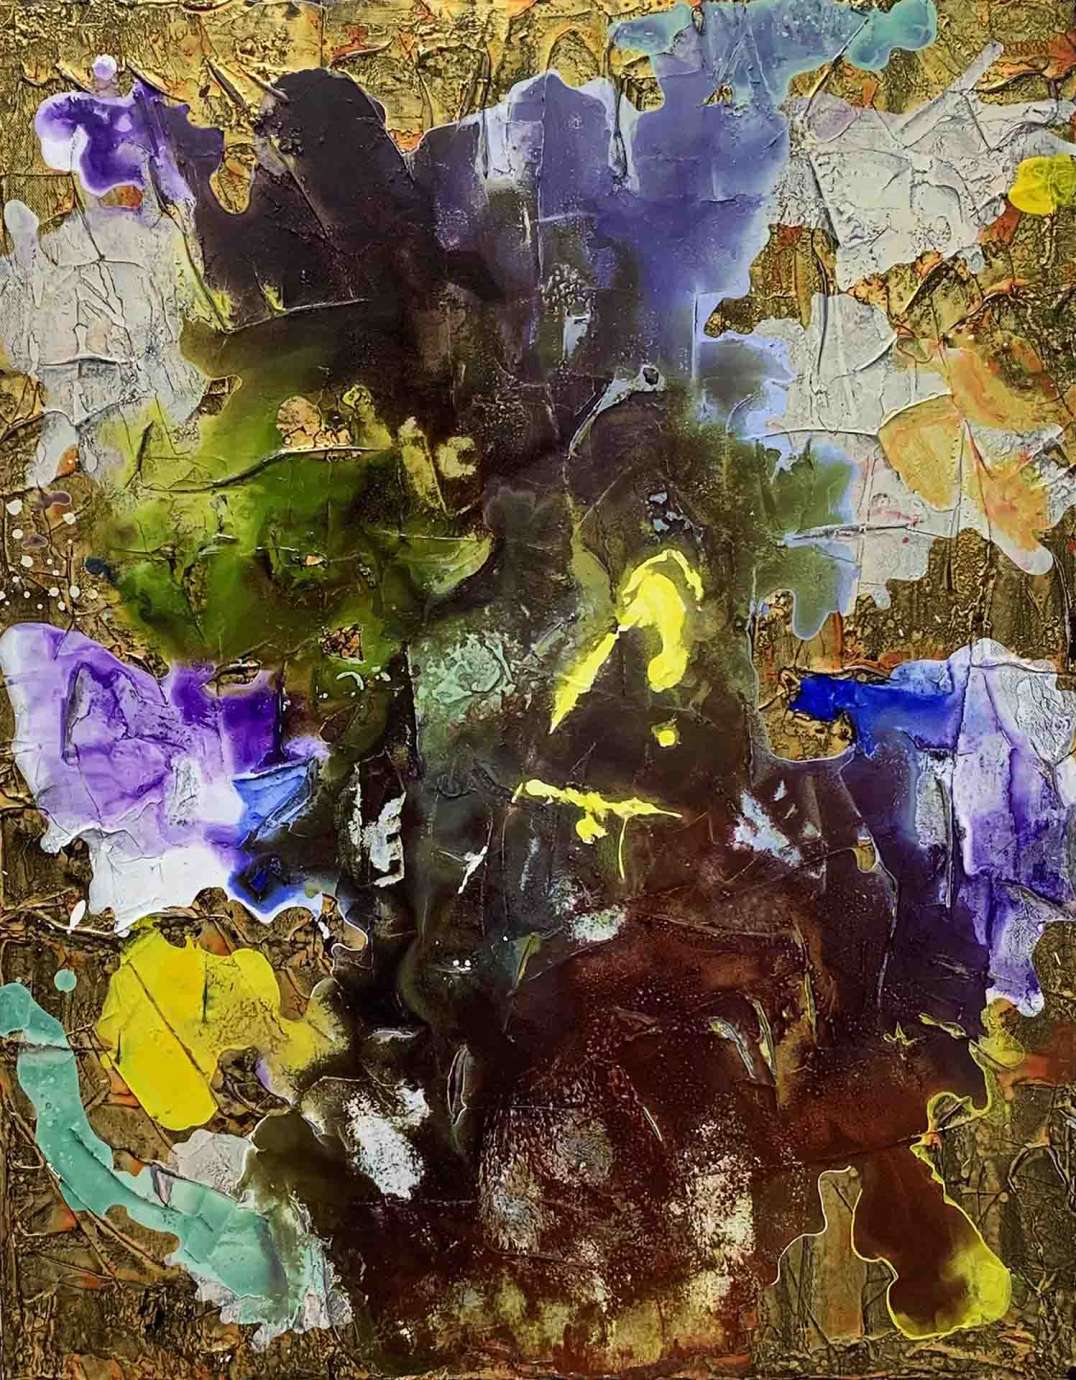 An abstract painting by Eduardo Lapentia featuring paint in purple, yellow/gold, browns, and some green